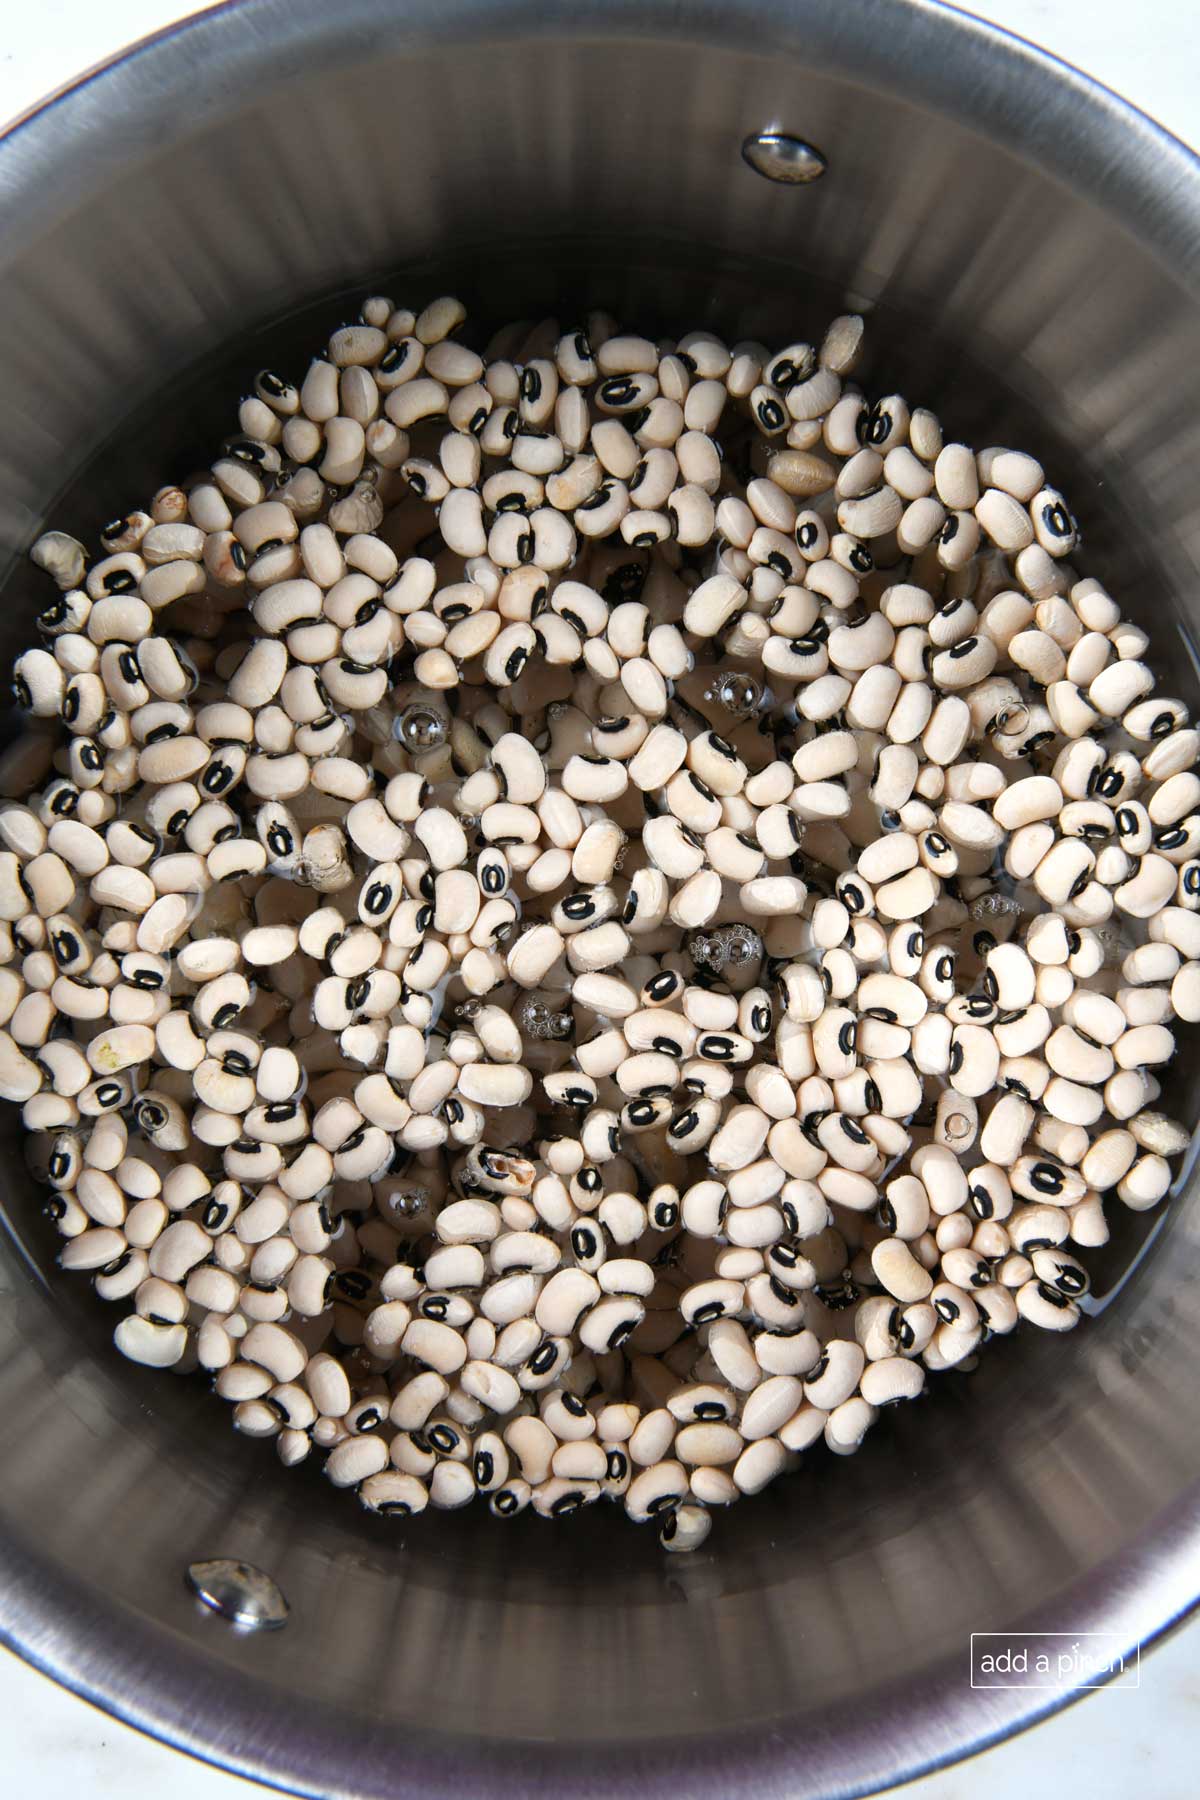 Black eyed peas soaking in water in a large pot.